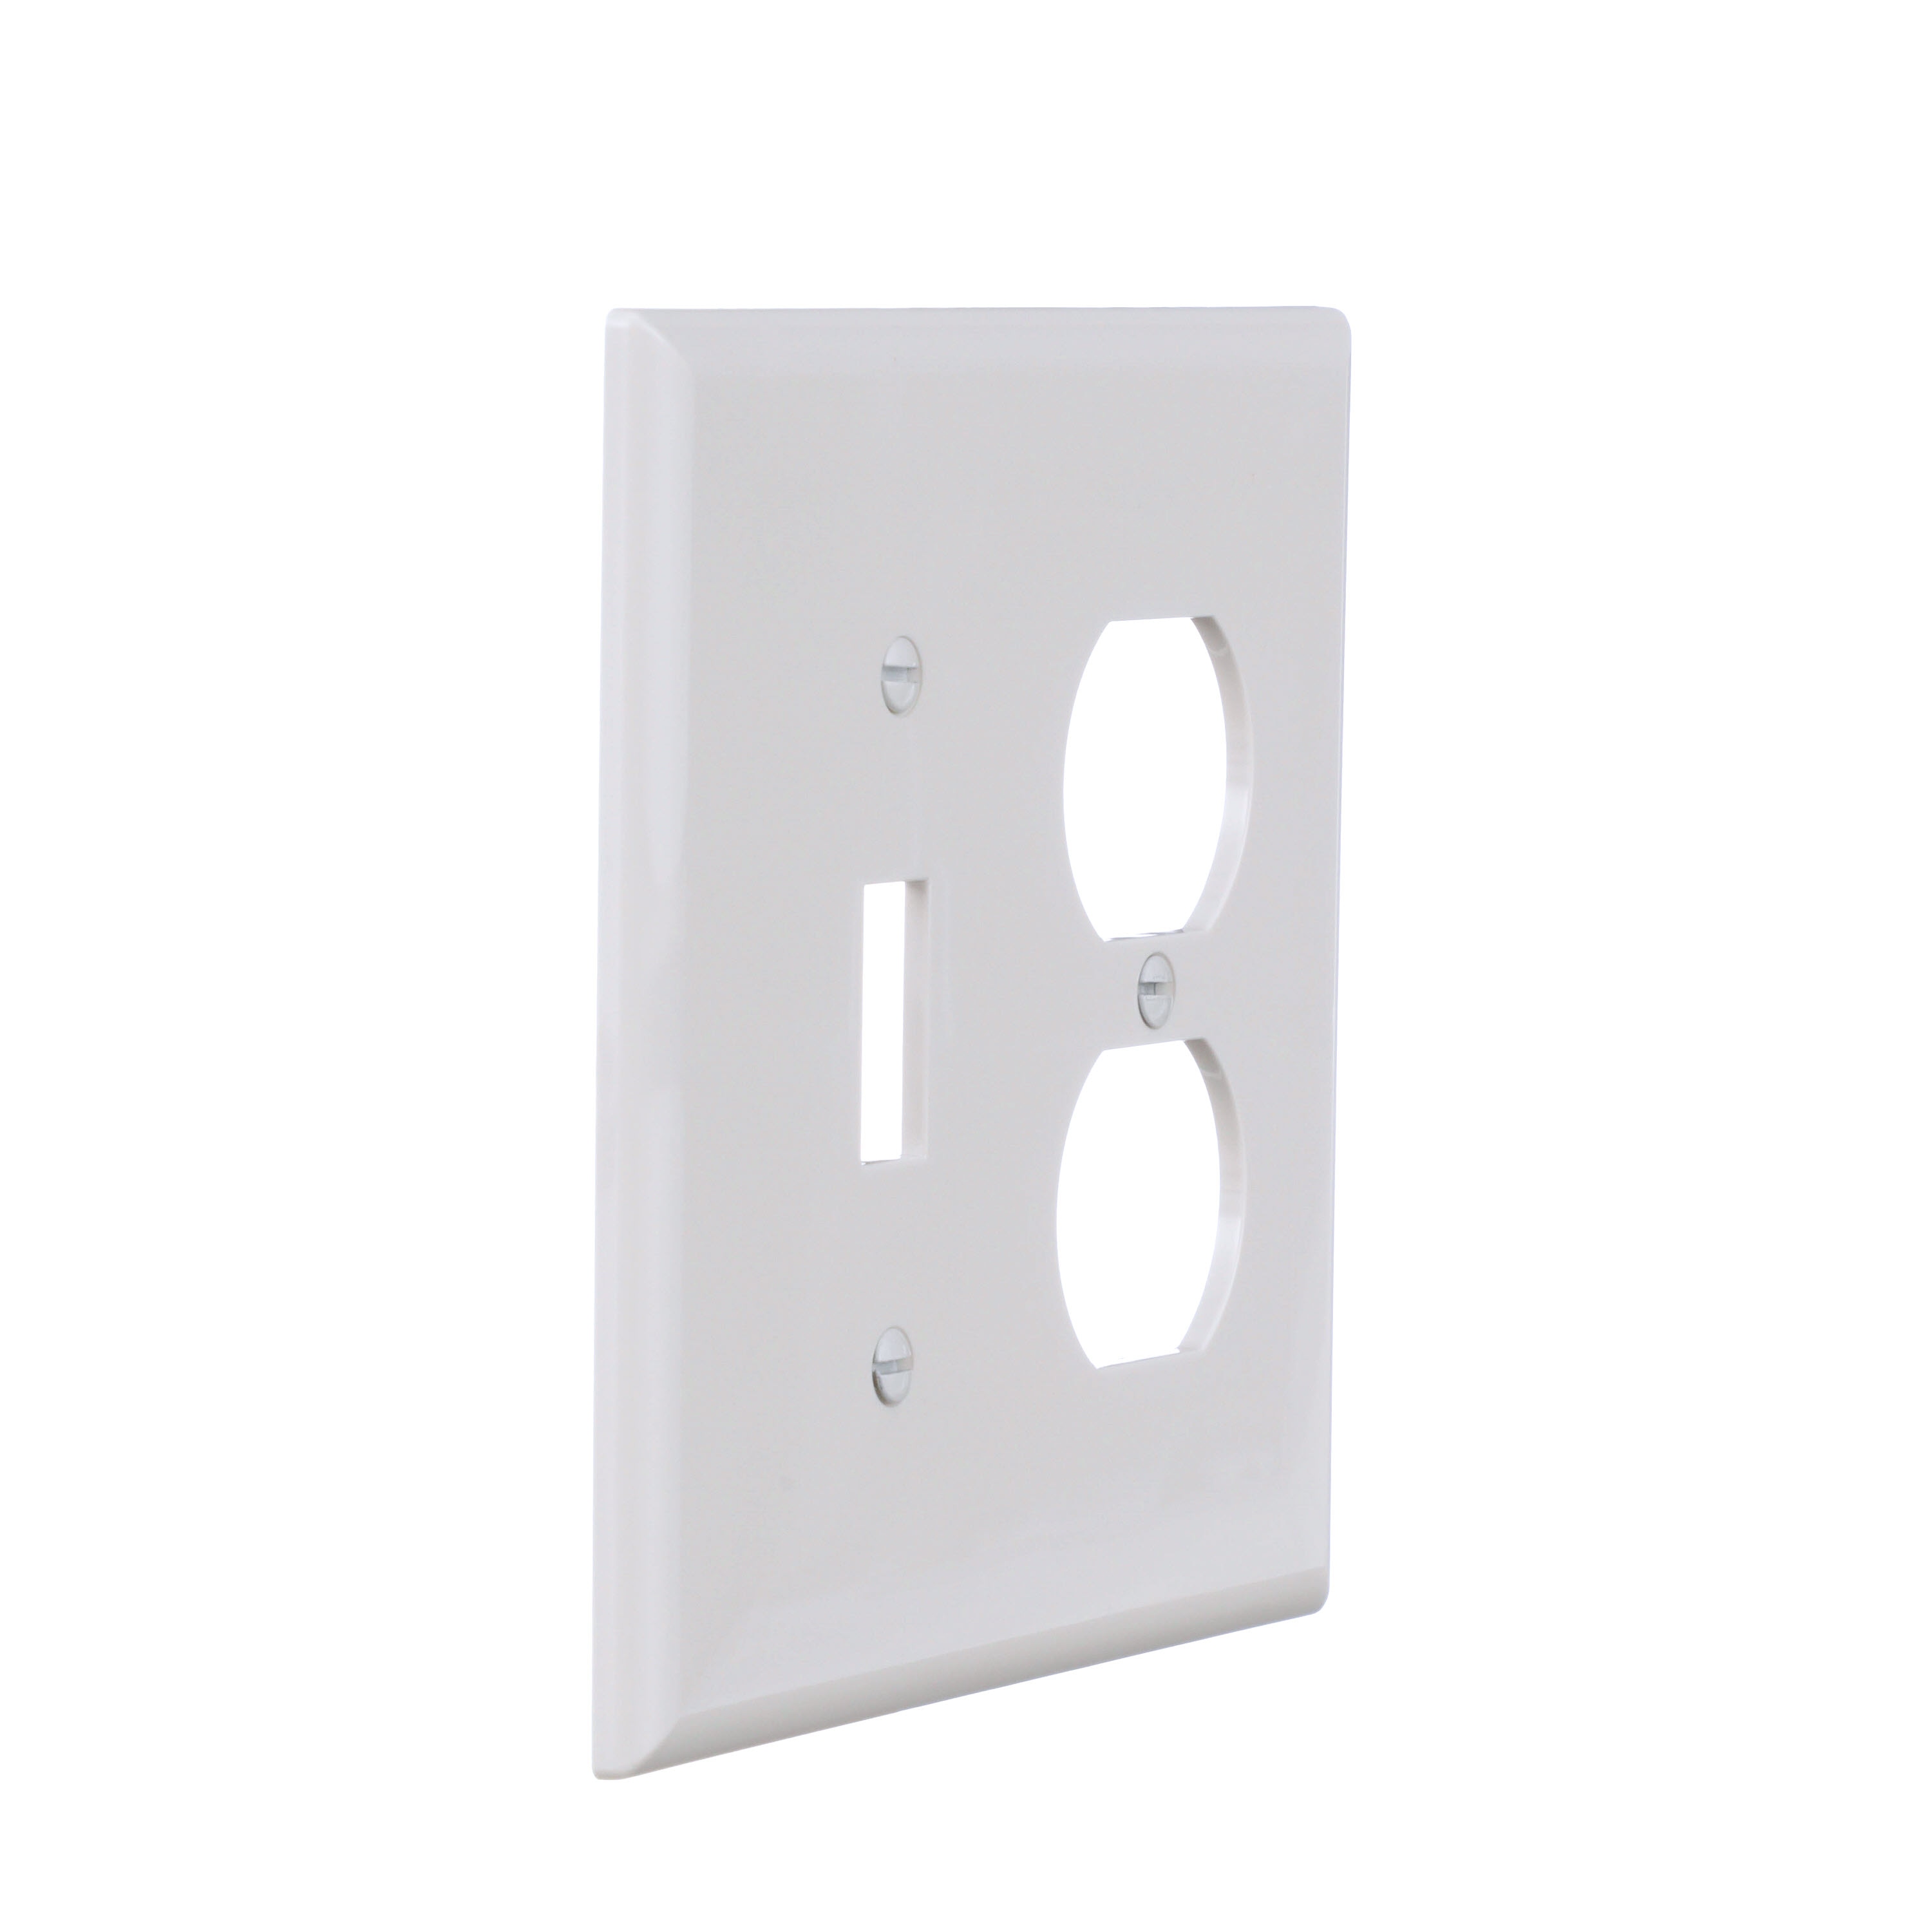 Wood Grain 2 Toggle Wall Switch Plate Cover Plastic 4 Per Order 